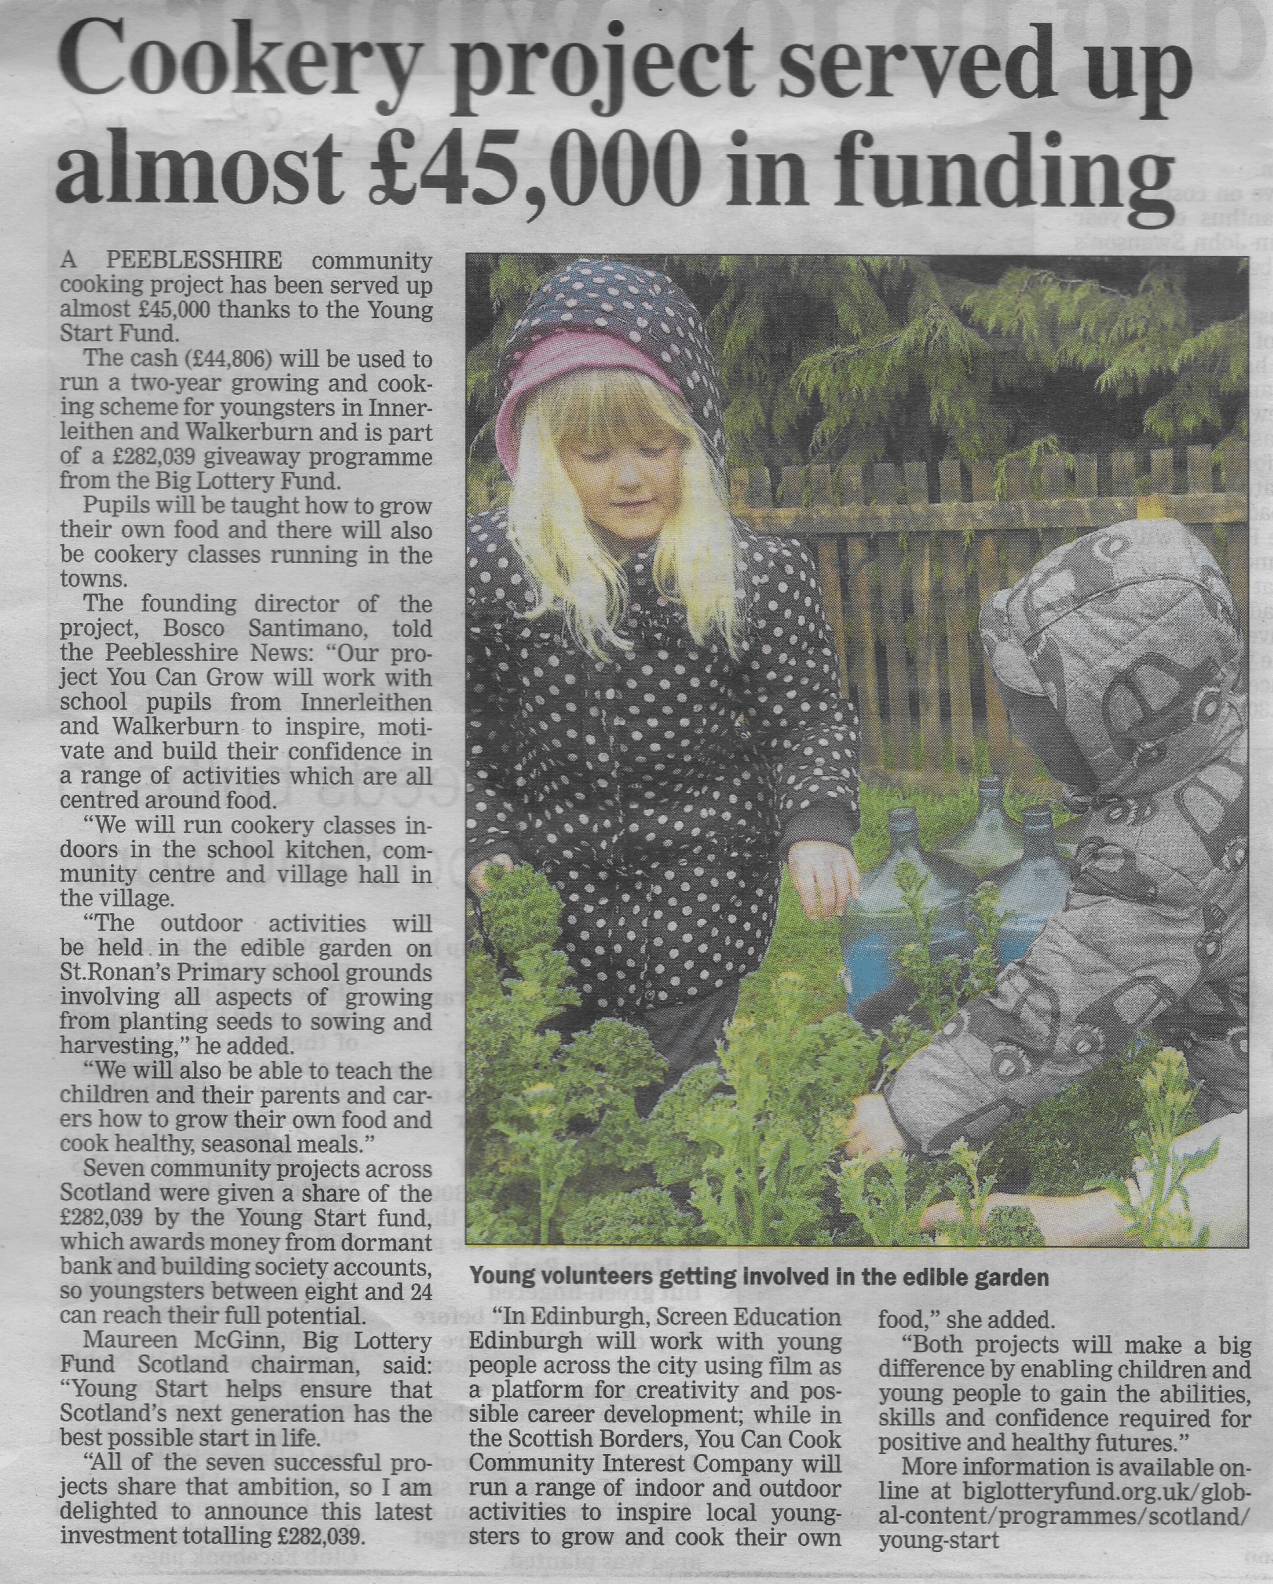 Press Clipping: Cookery project served up almost £45,000 in funding